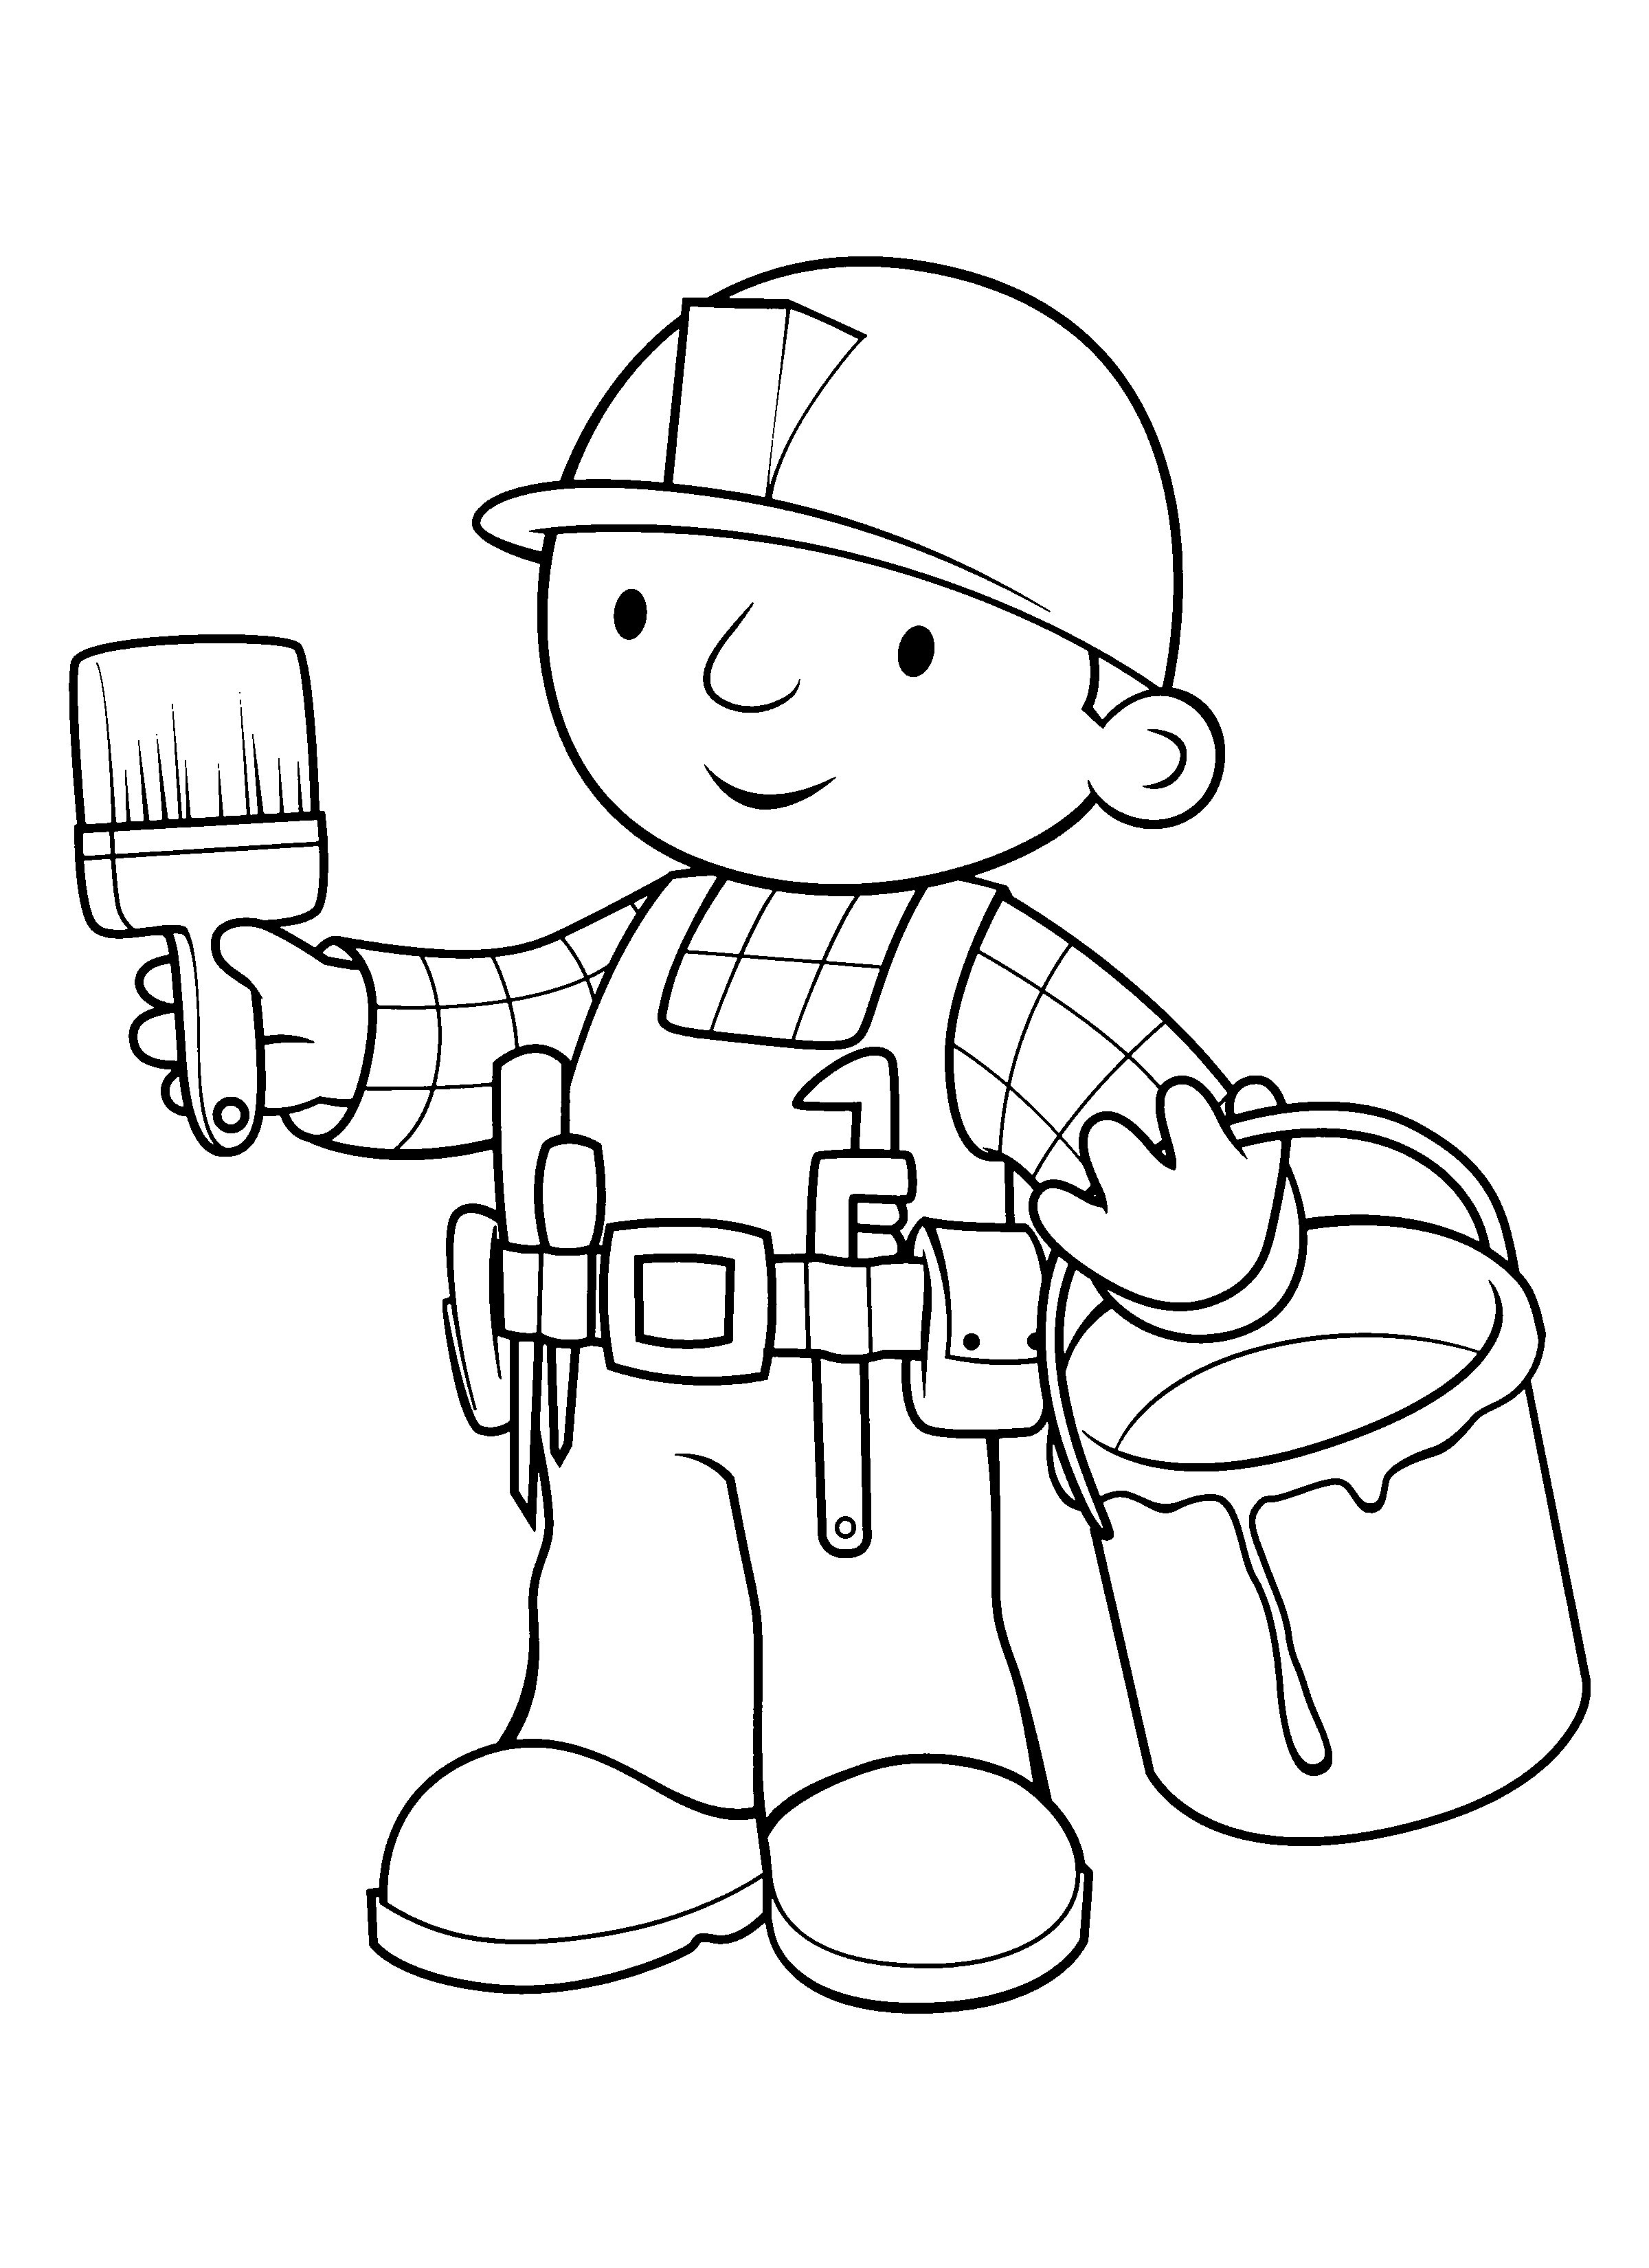 Download Free Printable Bob The Builder Coloring Pages For Kids